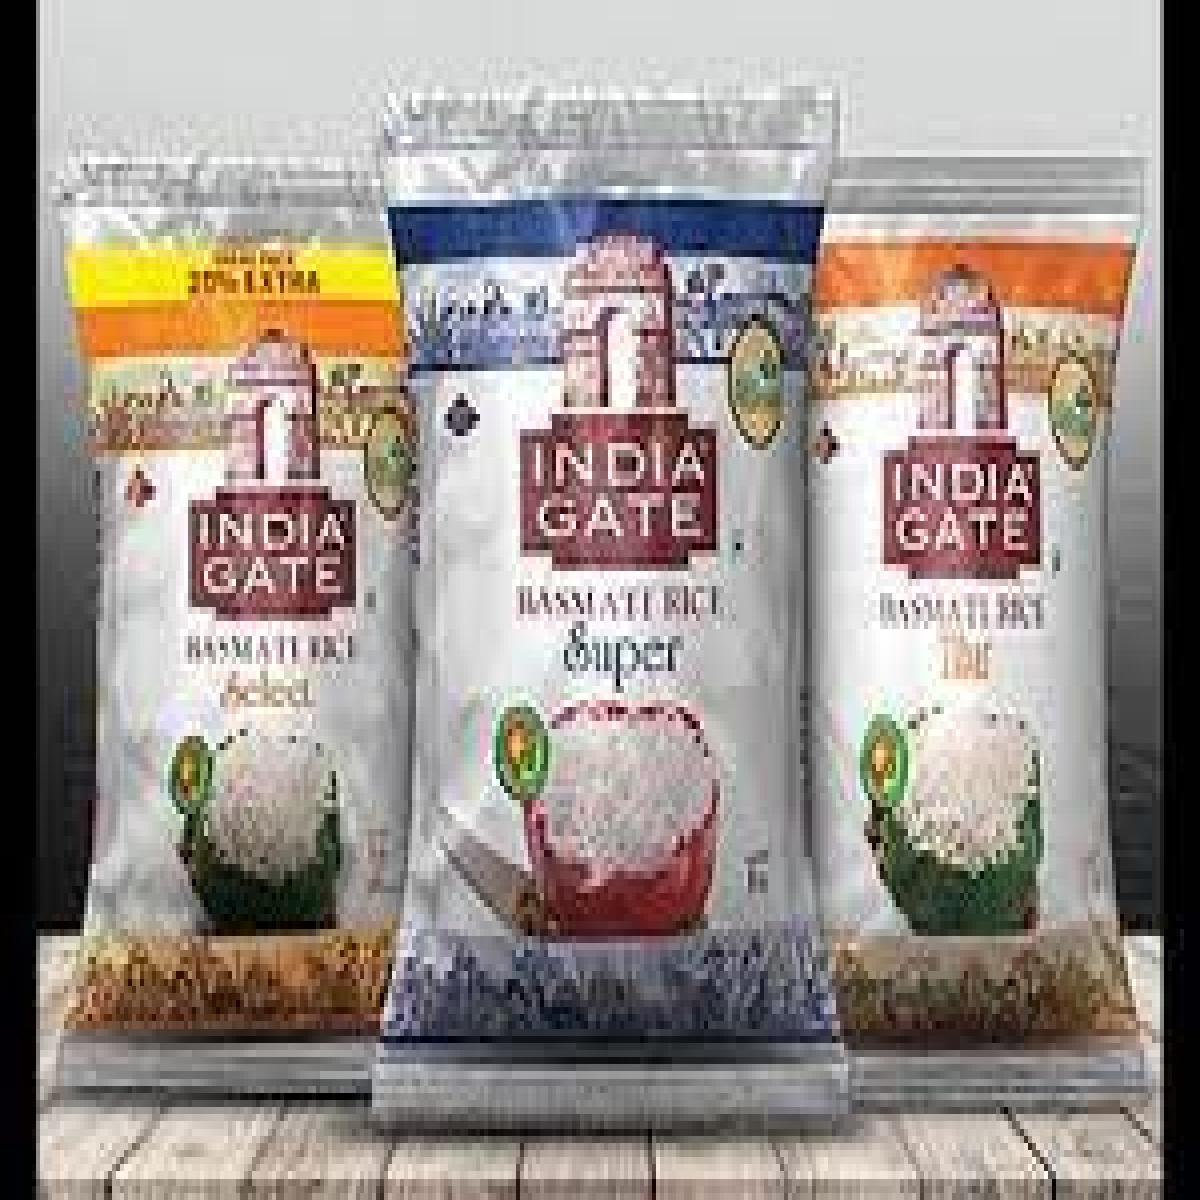 Latest Study Recognizes India Gate as the World’s No. 1 Basmati Rice Brand